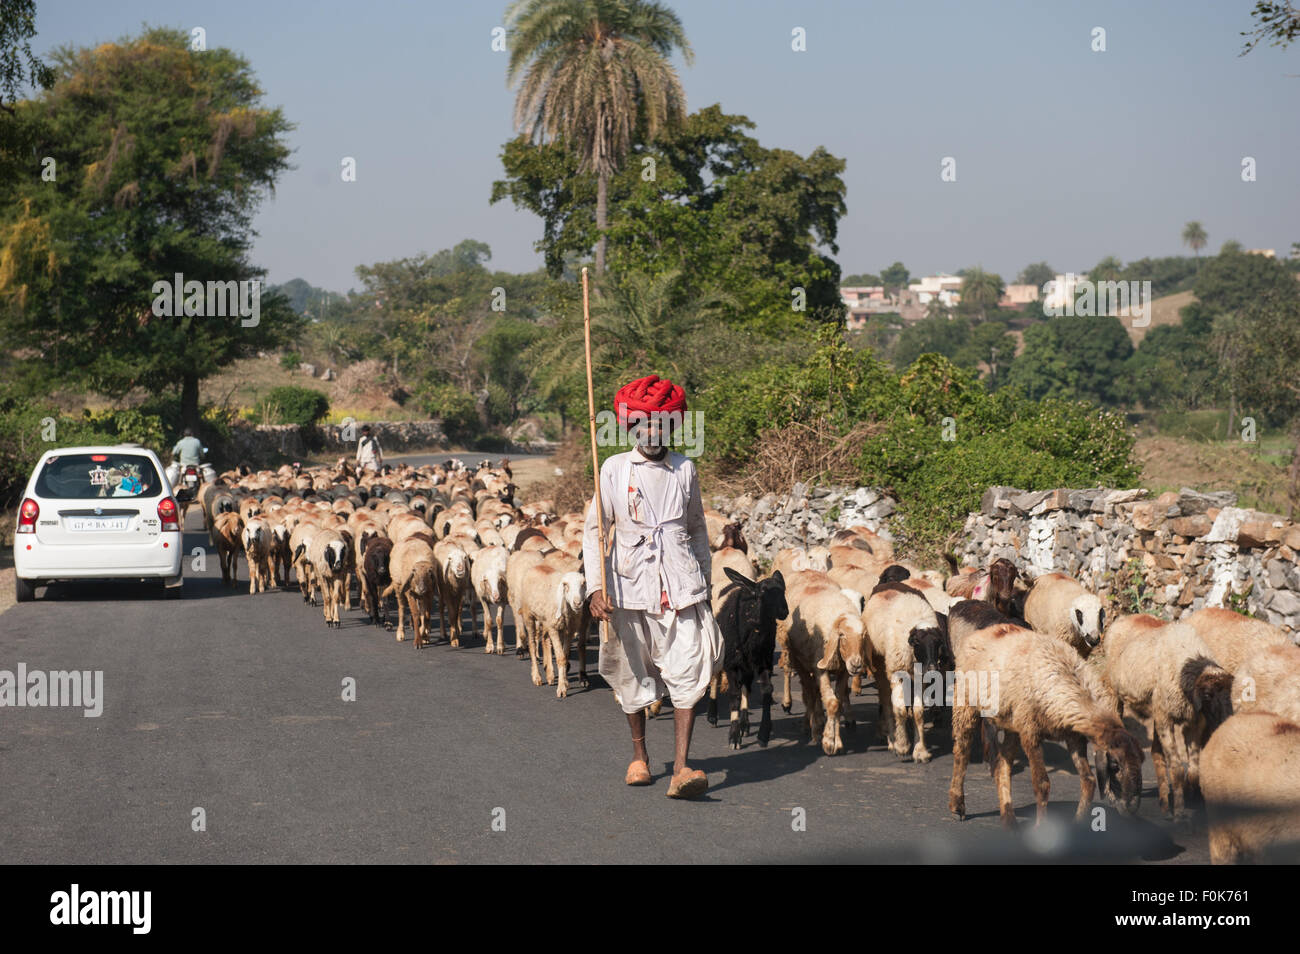 India; road from Udaipur to Jodhpur. Sheepherder in typical red rajasthan turban. Stock Photo